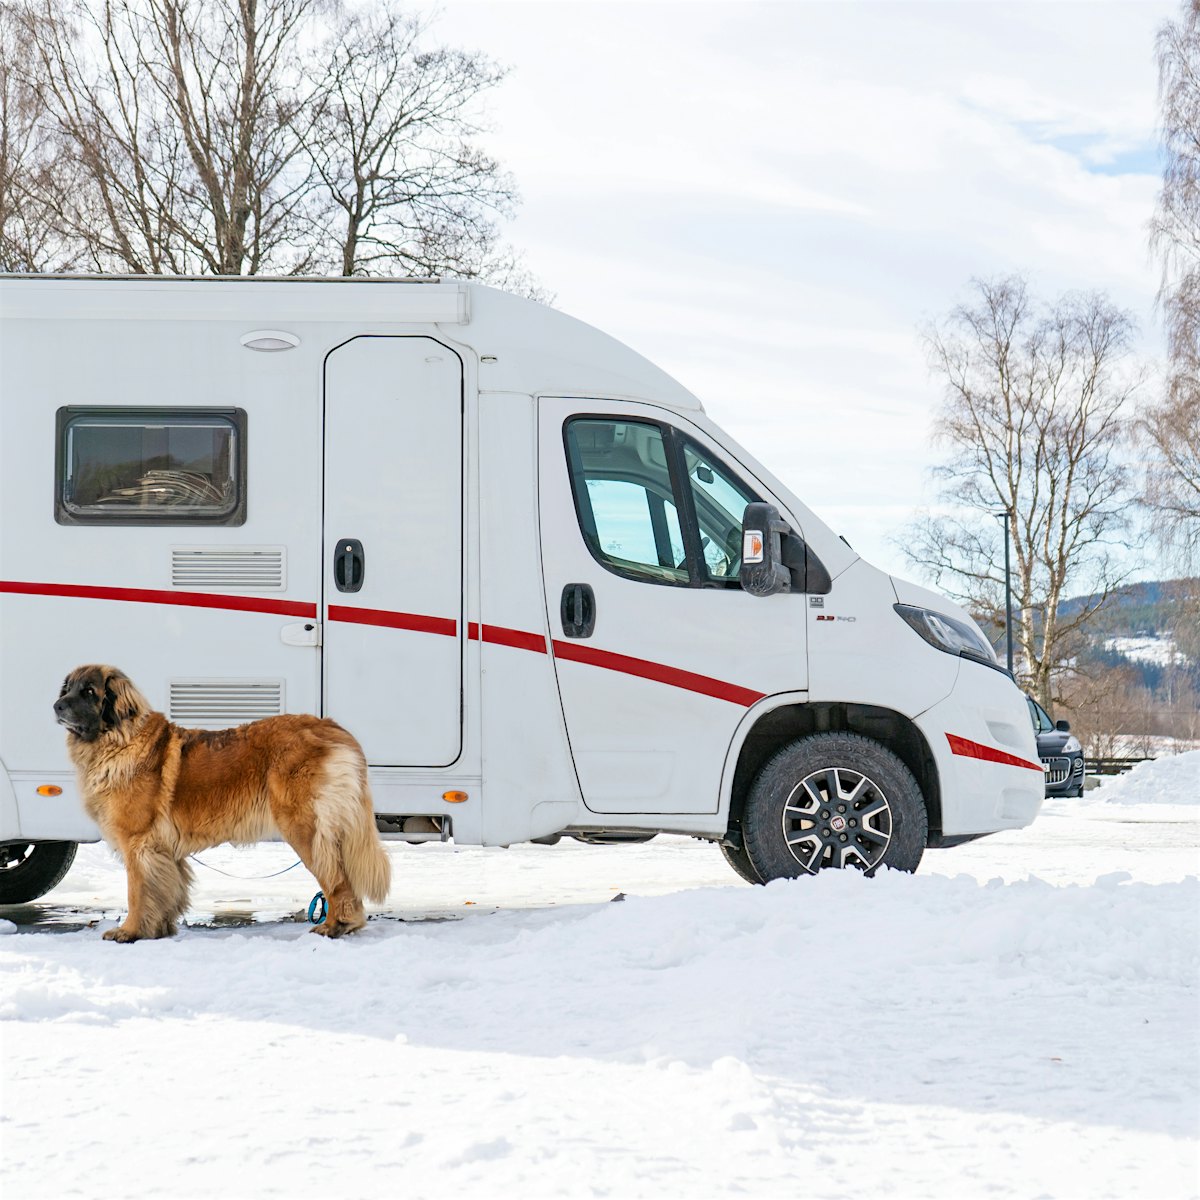 A mobile home is parked in a mobile home space in winter, with a dog in front. Photo